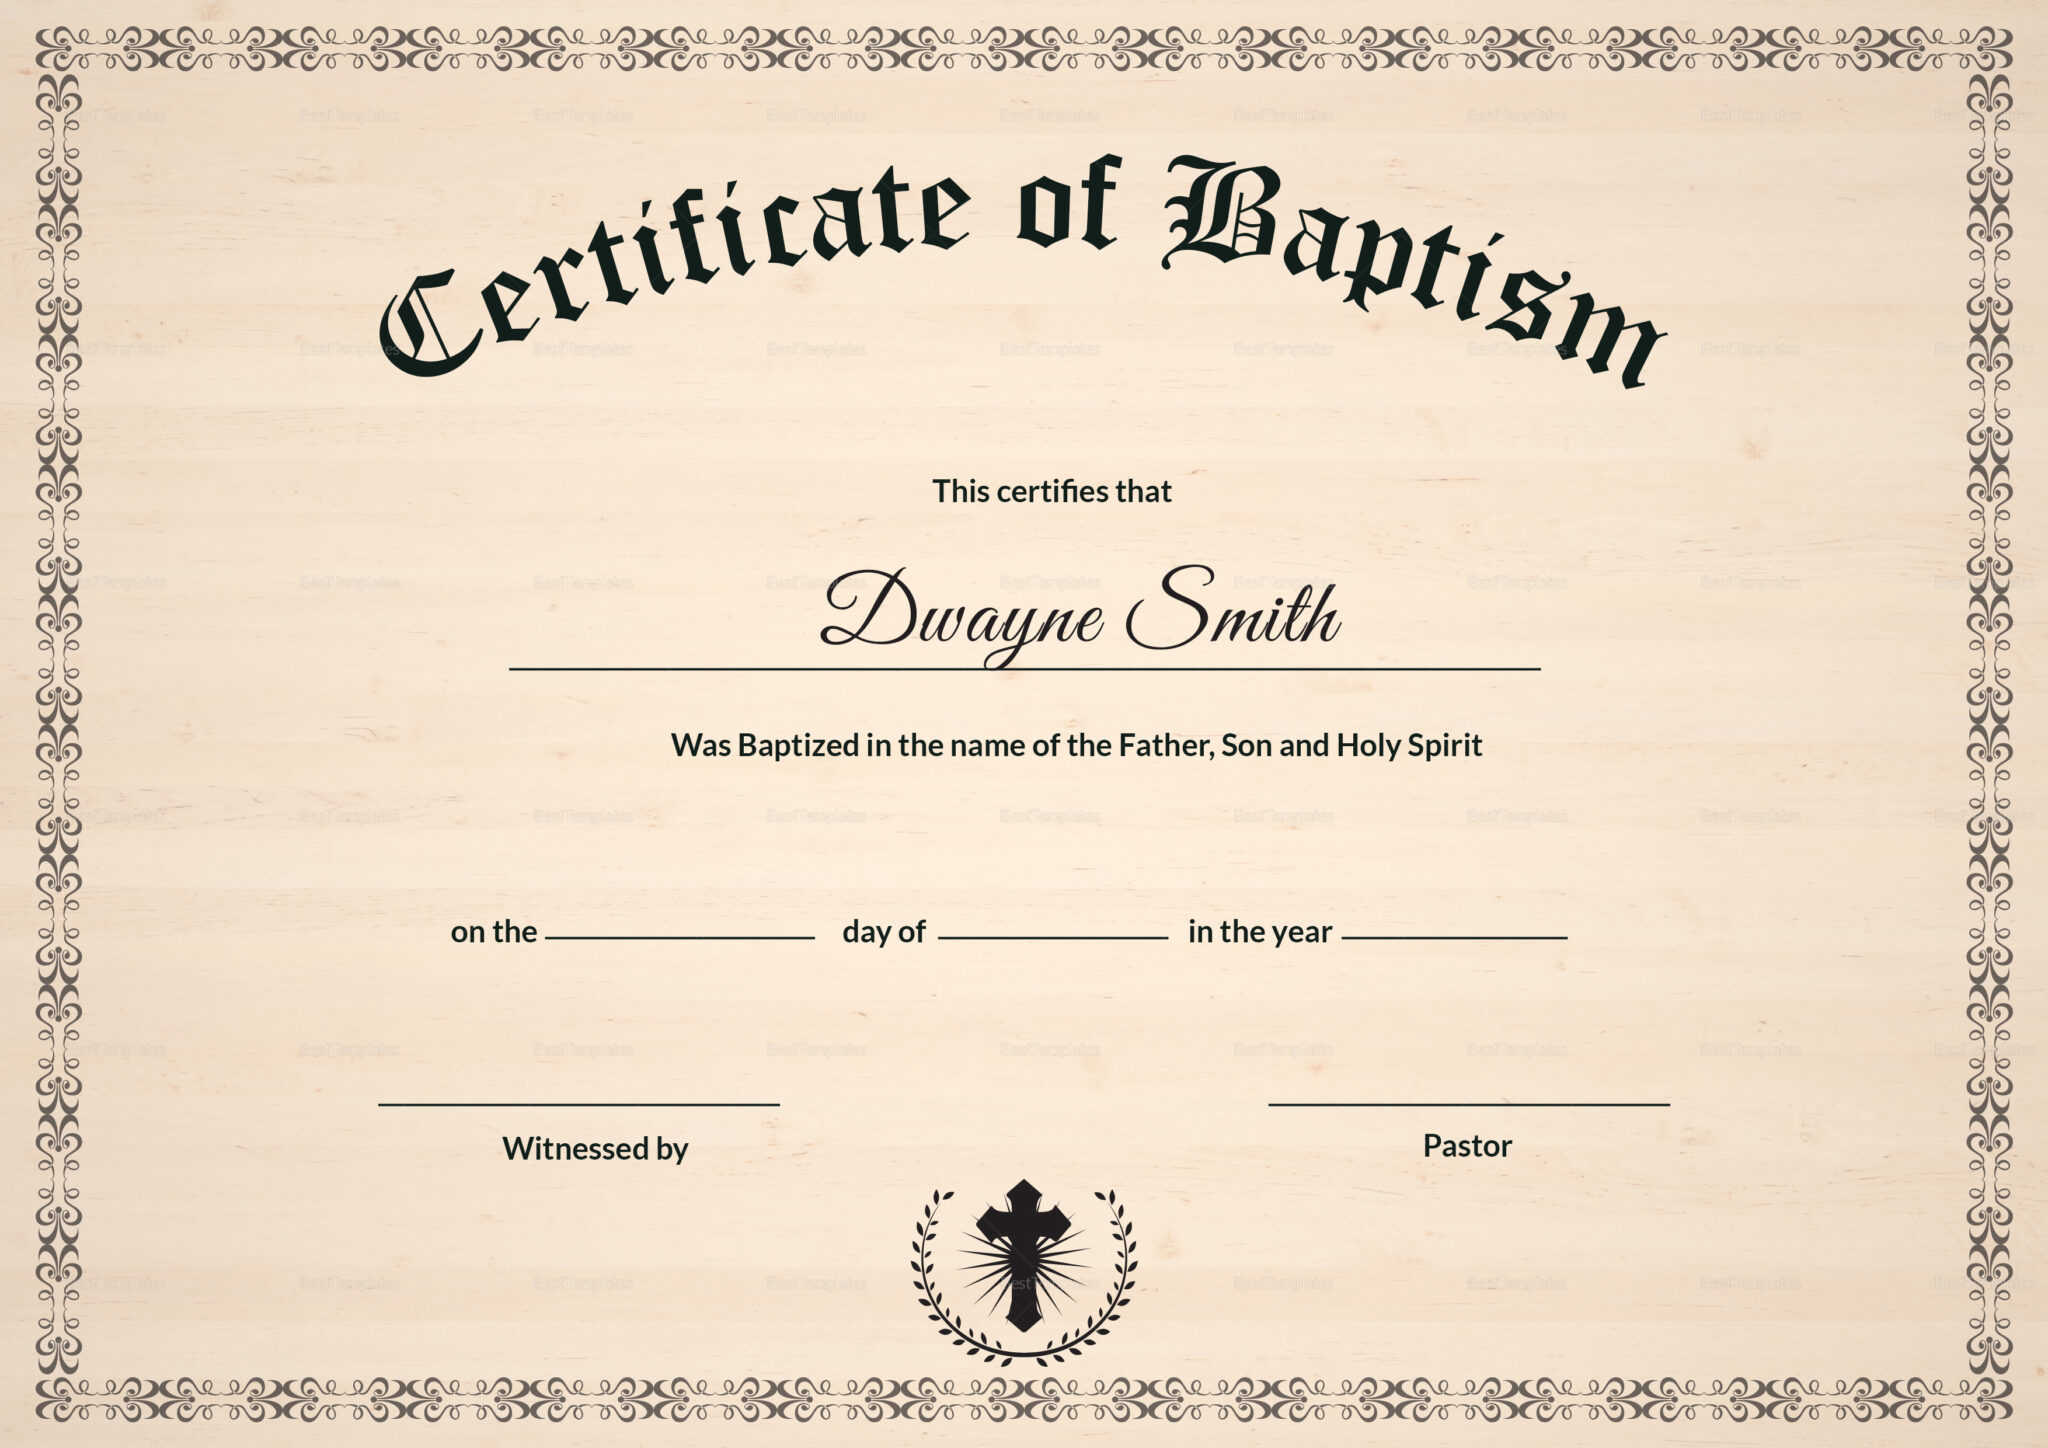 baptism-certificate-template-download-professional-template